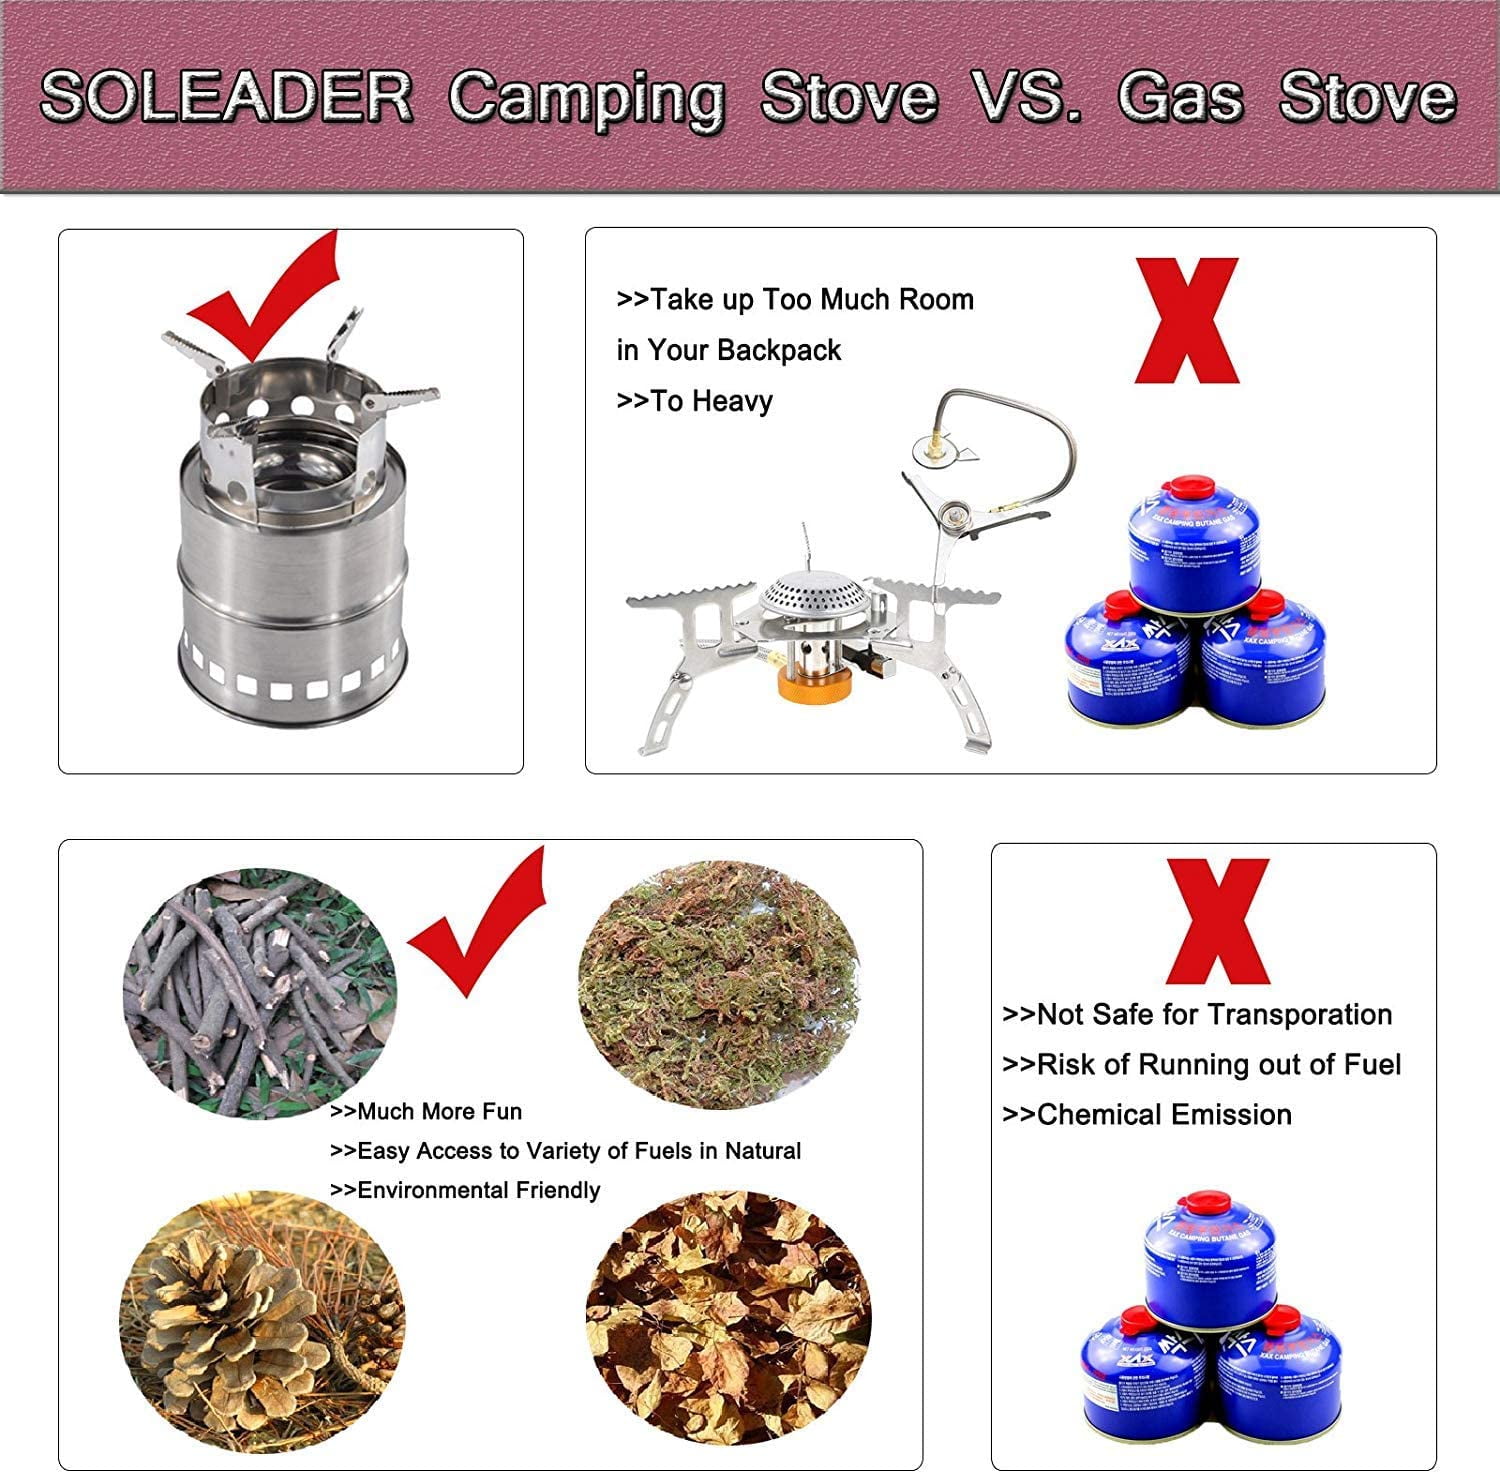 The next generation of camp Stoves - safer, multi-purpose, eco